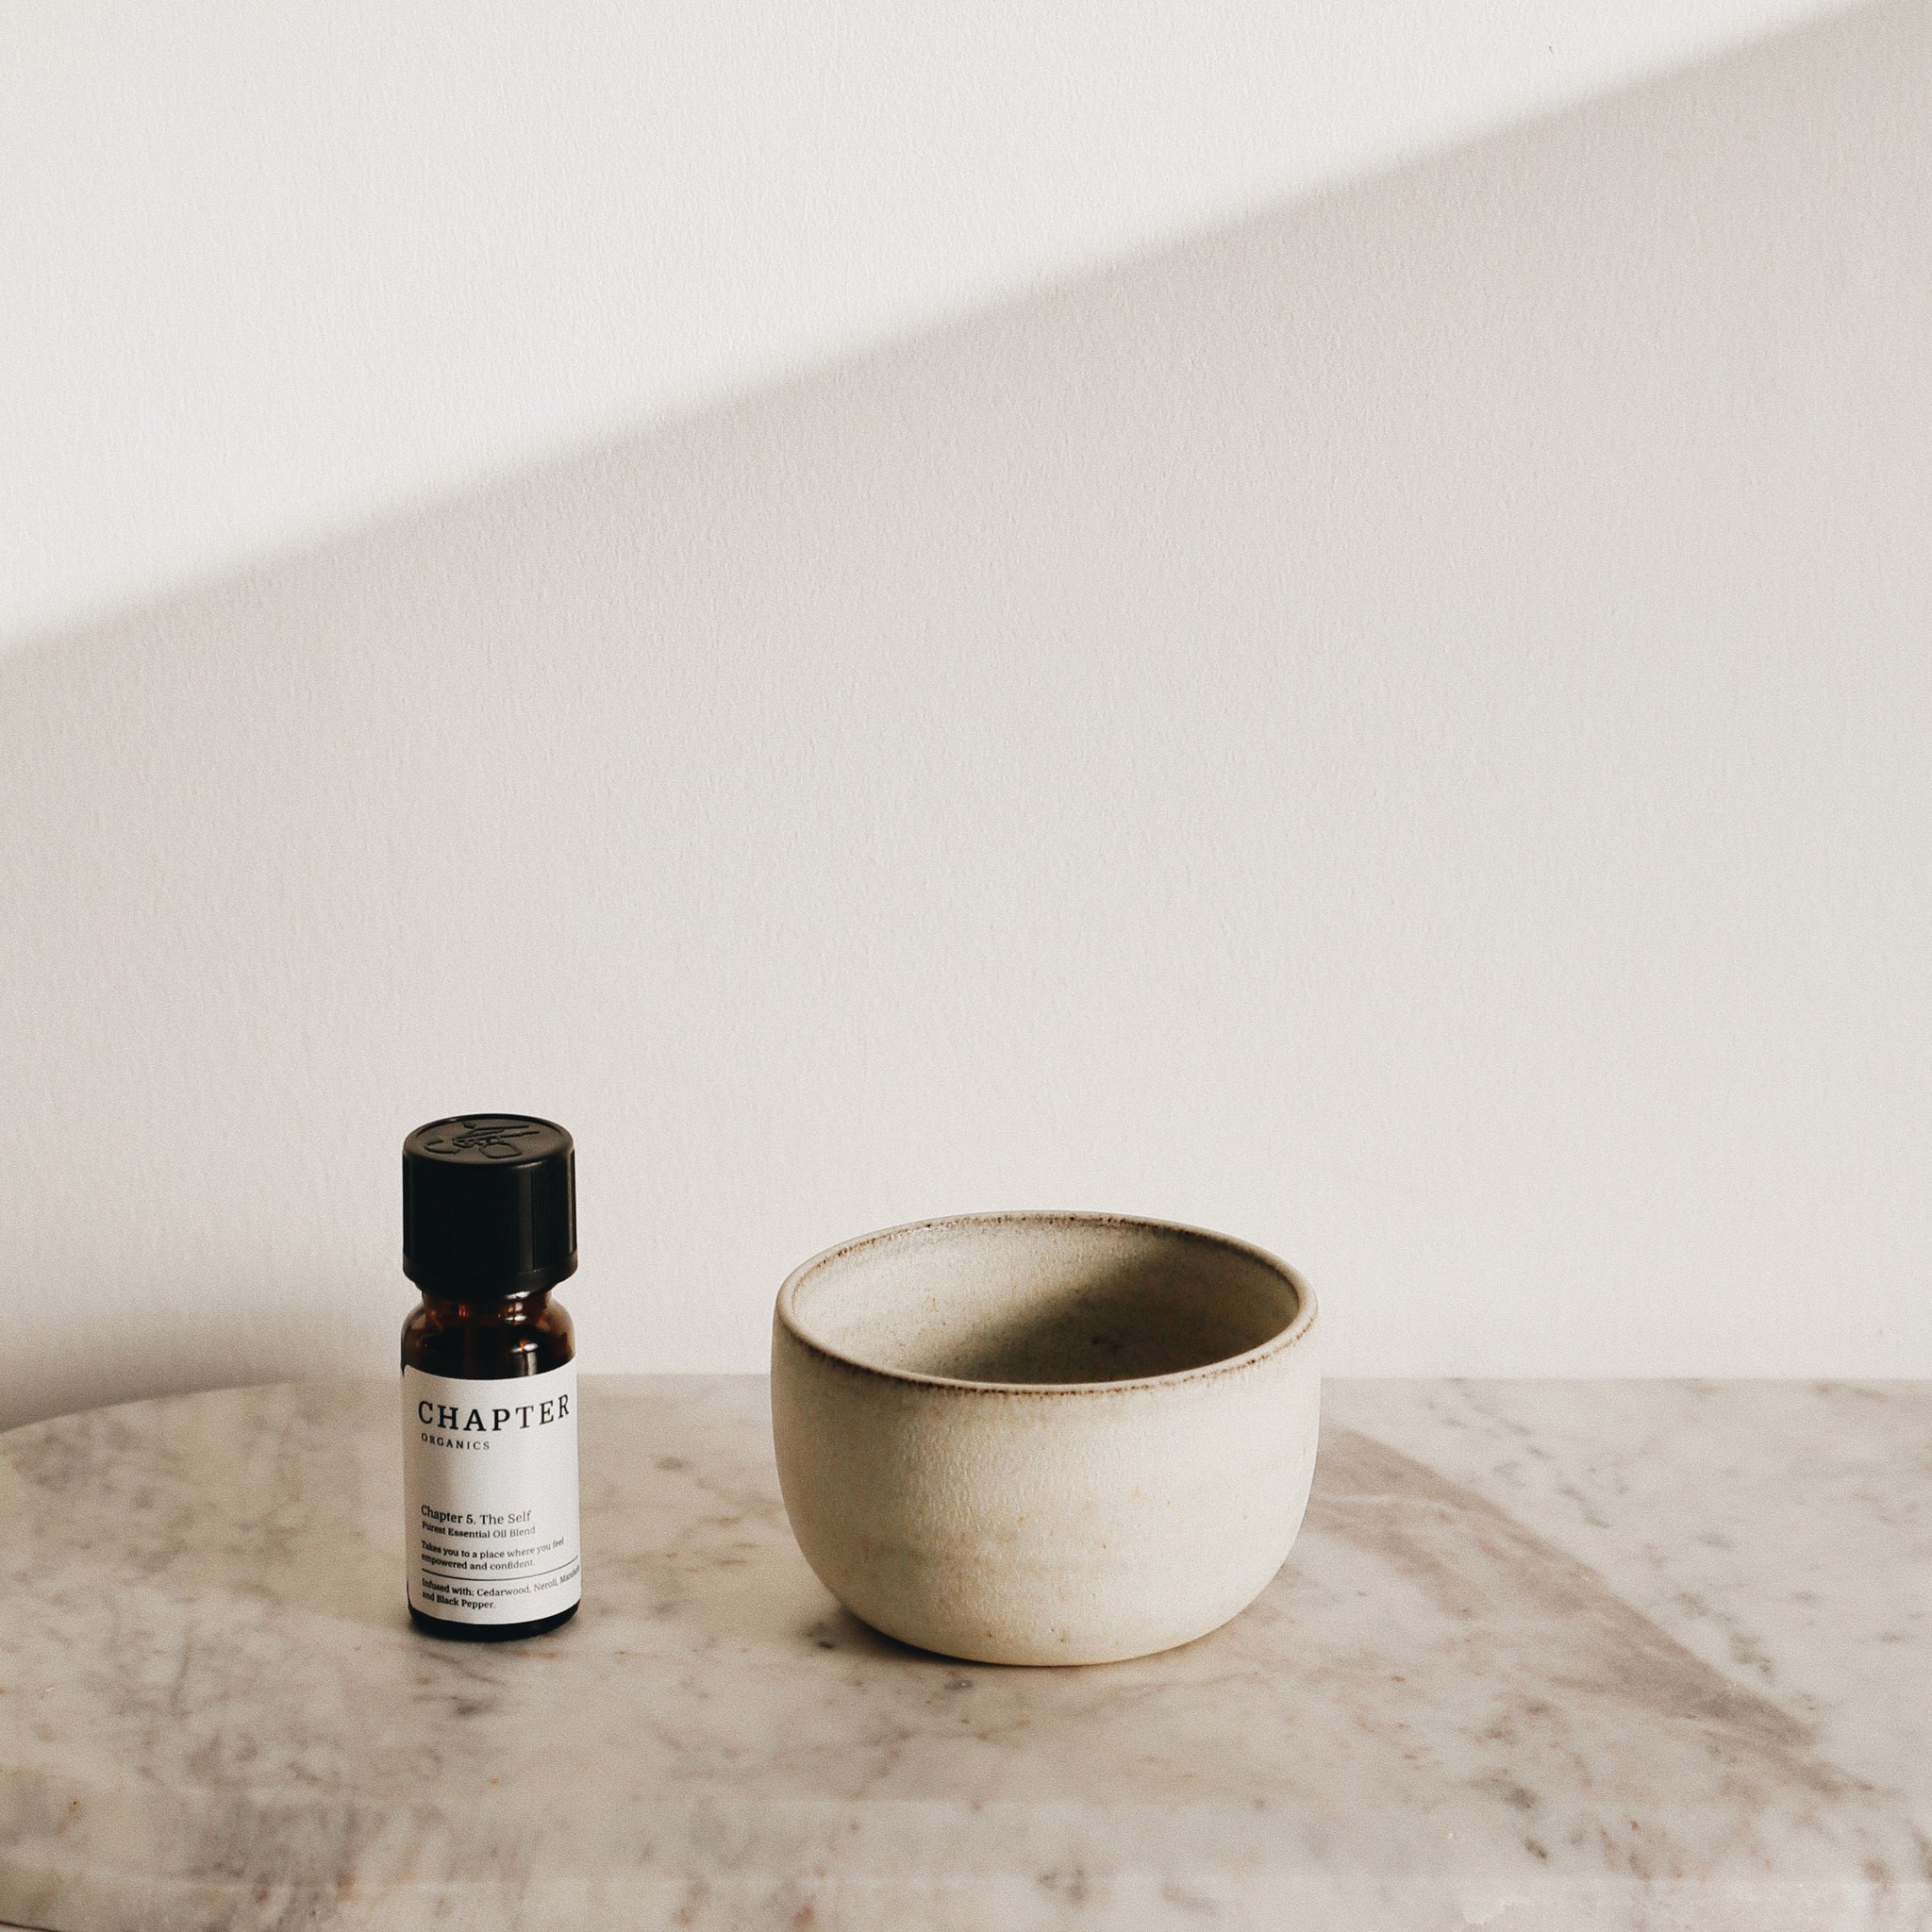 The Tonic Purest Essential Oil Blend